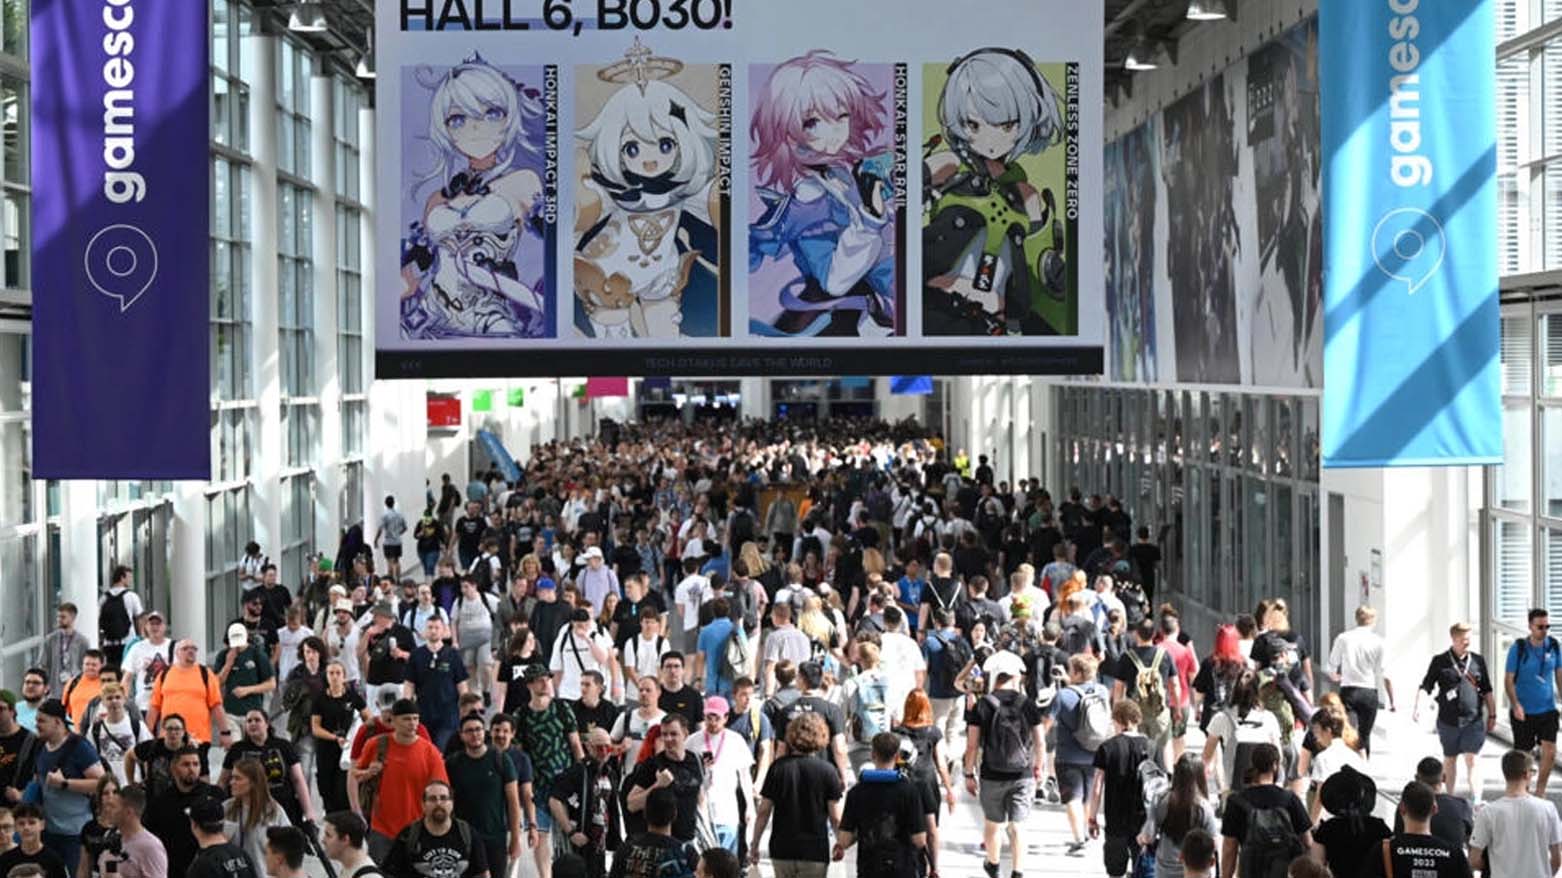 The crowd at this year's Gamescom fair in Cologne, Germany. (Photo: Fassbender/AFP)